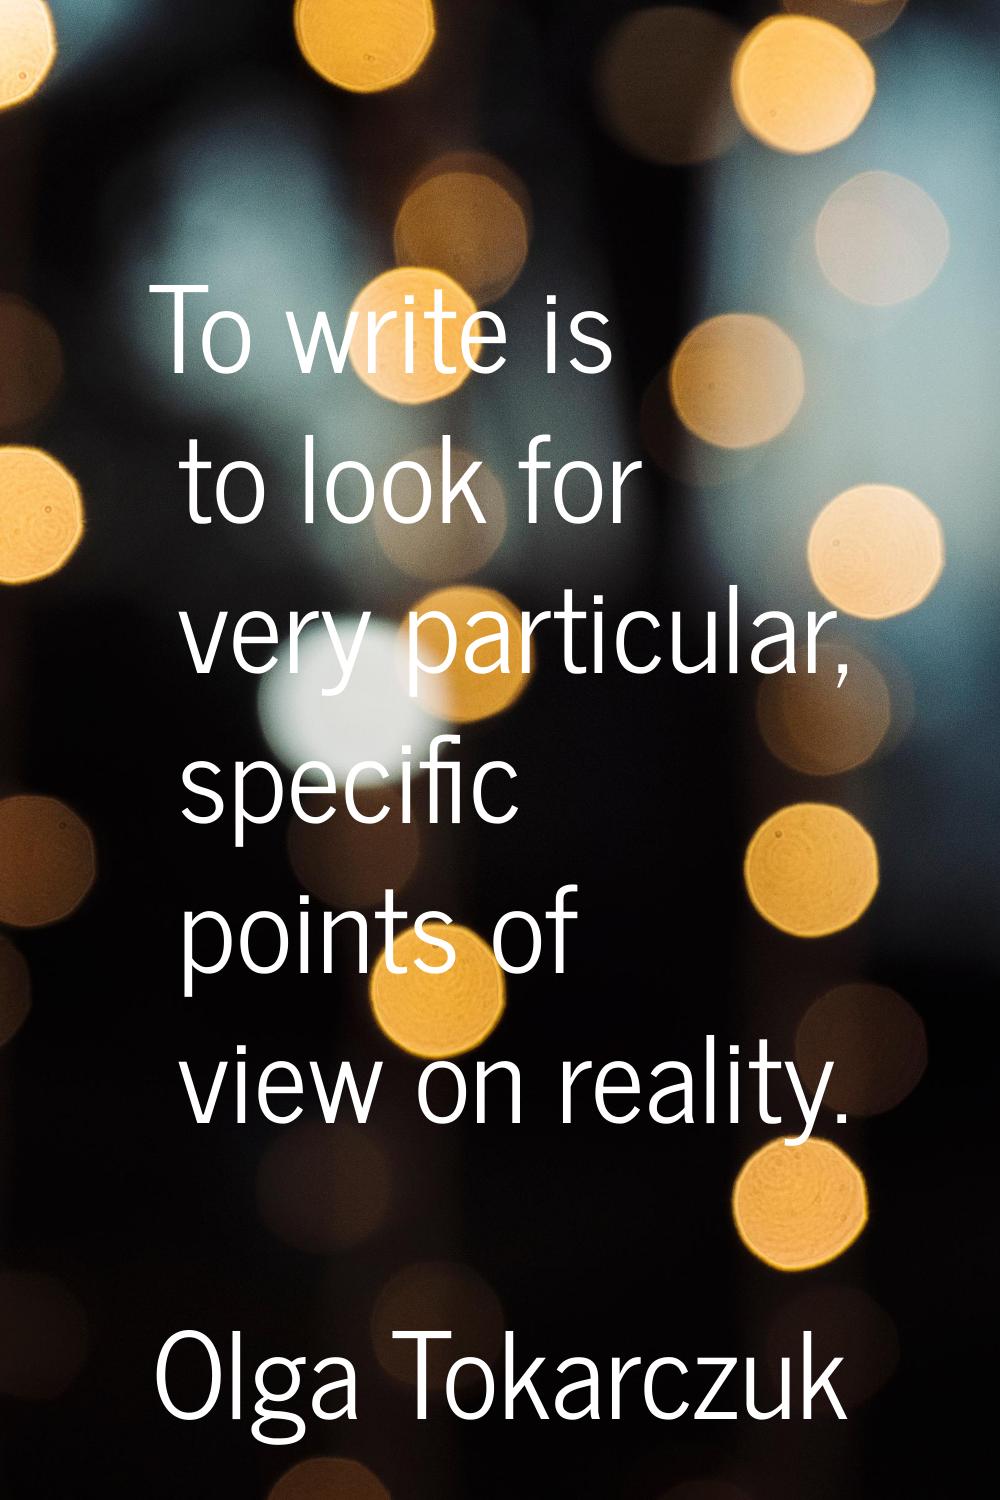 To write is to look for very particular, specific points of view on reality.